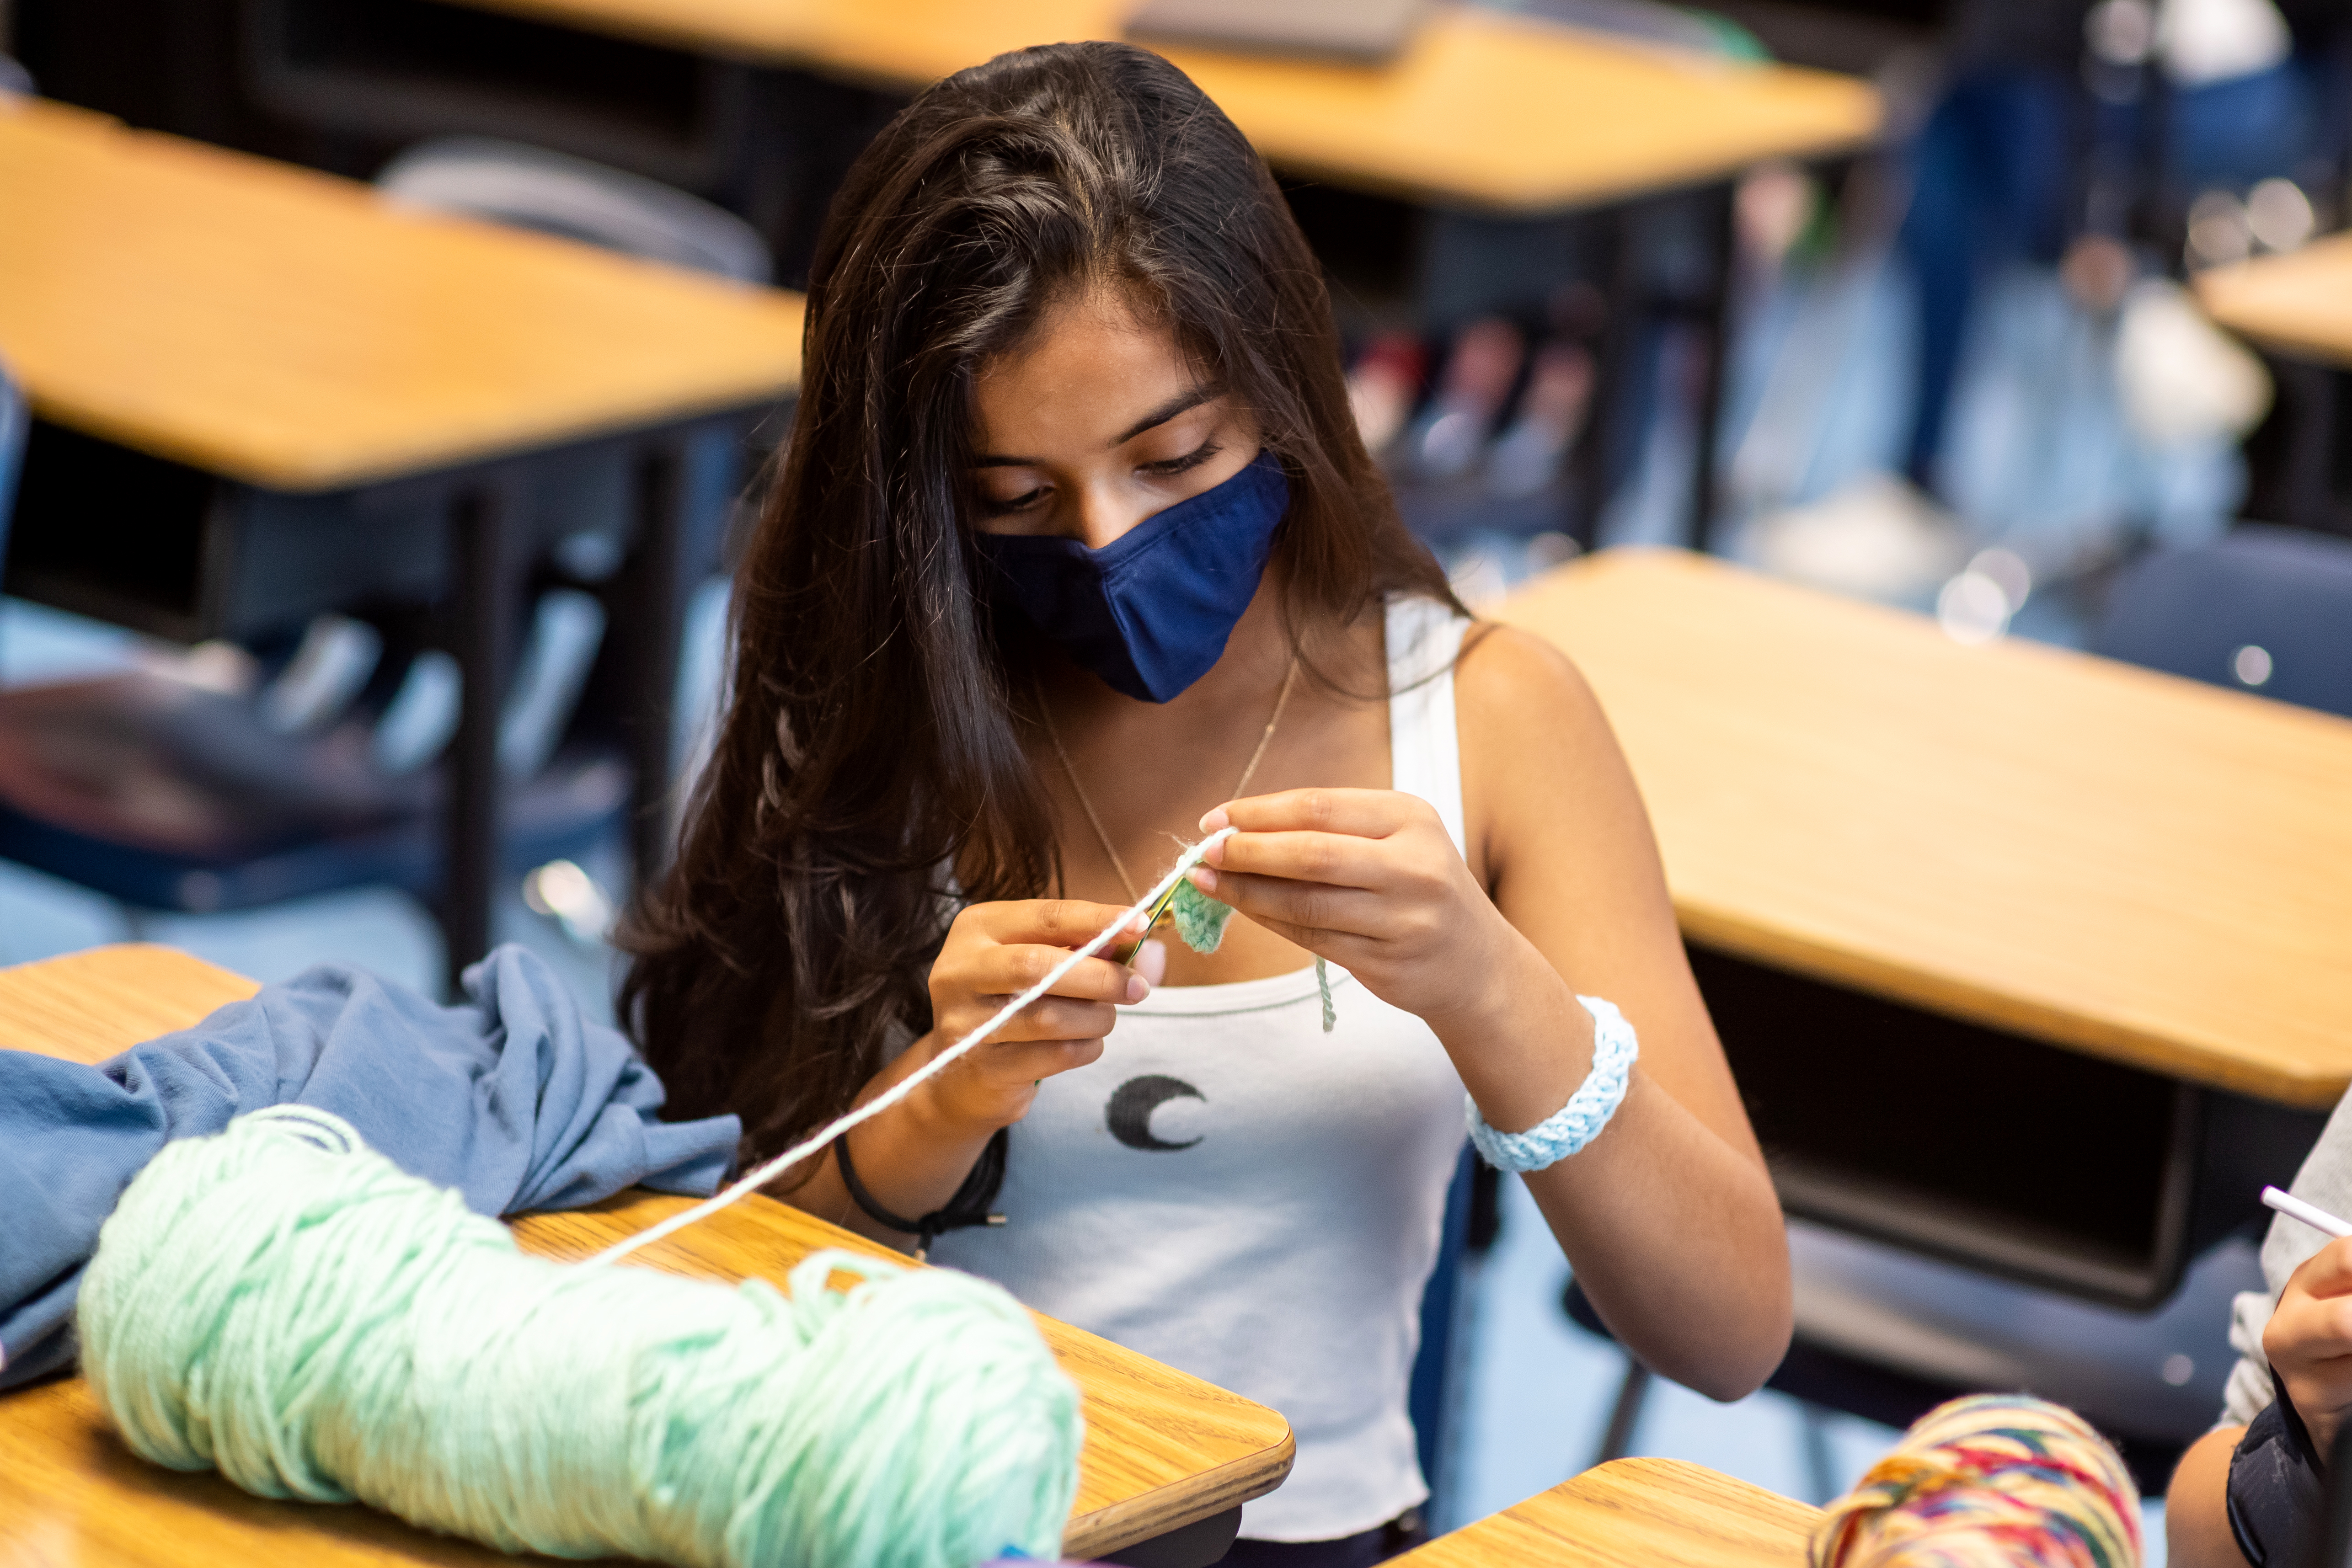 A Katherine Johnson Middle School student is learning to crochet as part of a social-emotional learning time period intended to help students build relationships with staff and pursue enrichment activities.